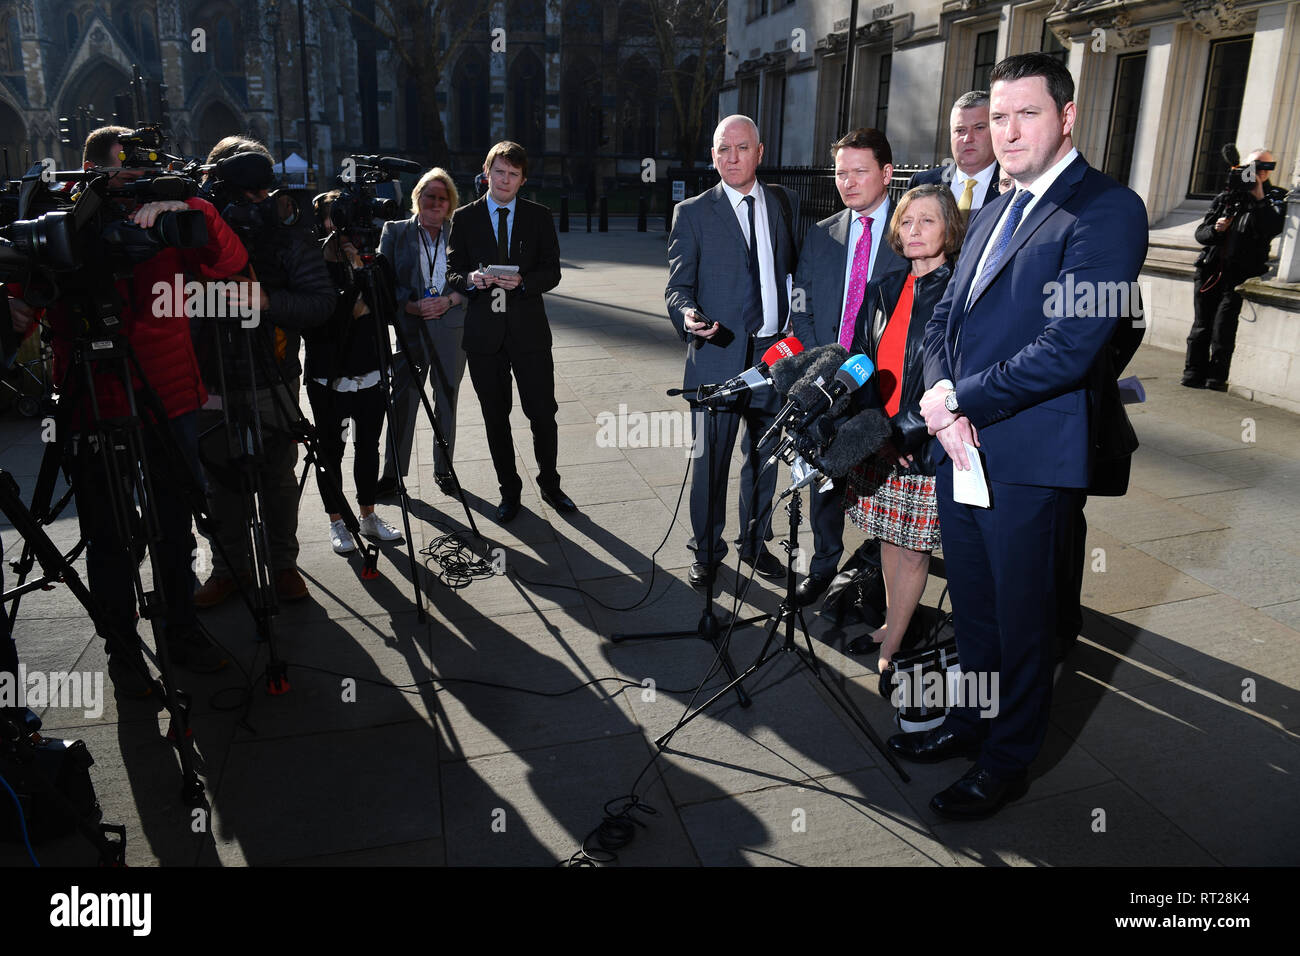 Geraldine Finucane, the widow of murdered Belfast solicitor Pat Finucane, accompanied by her sons John (right) and Michael (to her left) speaks with reporters outside the Supreme Court in central London, after the family lost a Supreme Court challenge over the decision not to hold a public inquiry into his killing, but won a declaration that an effective investigation into his death has not been carried out. Stock Photo